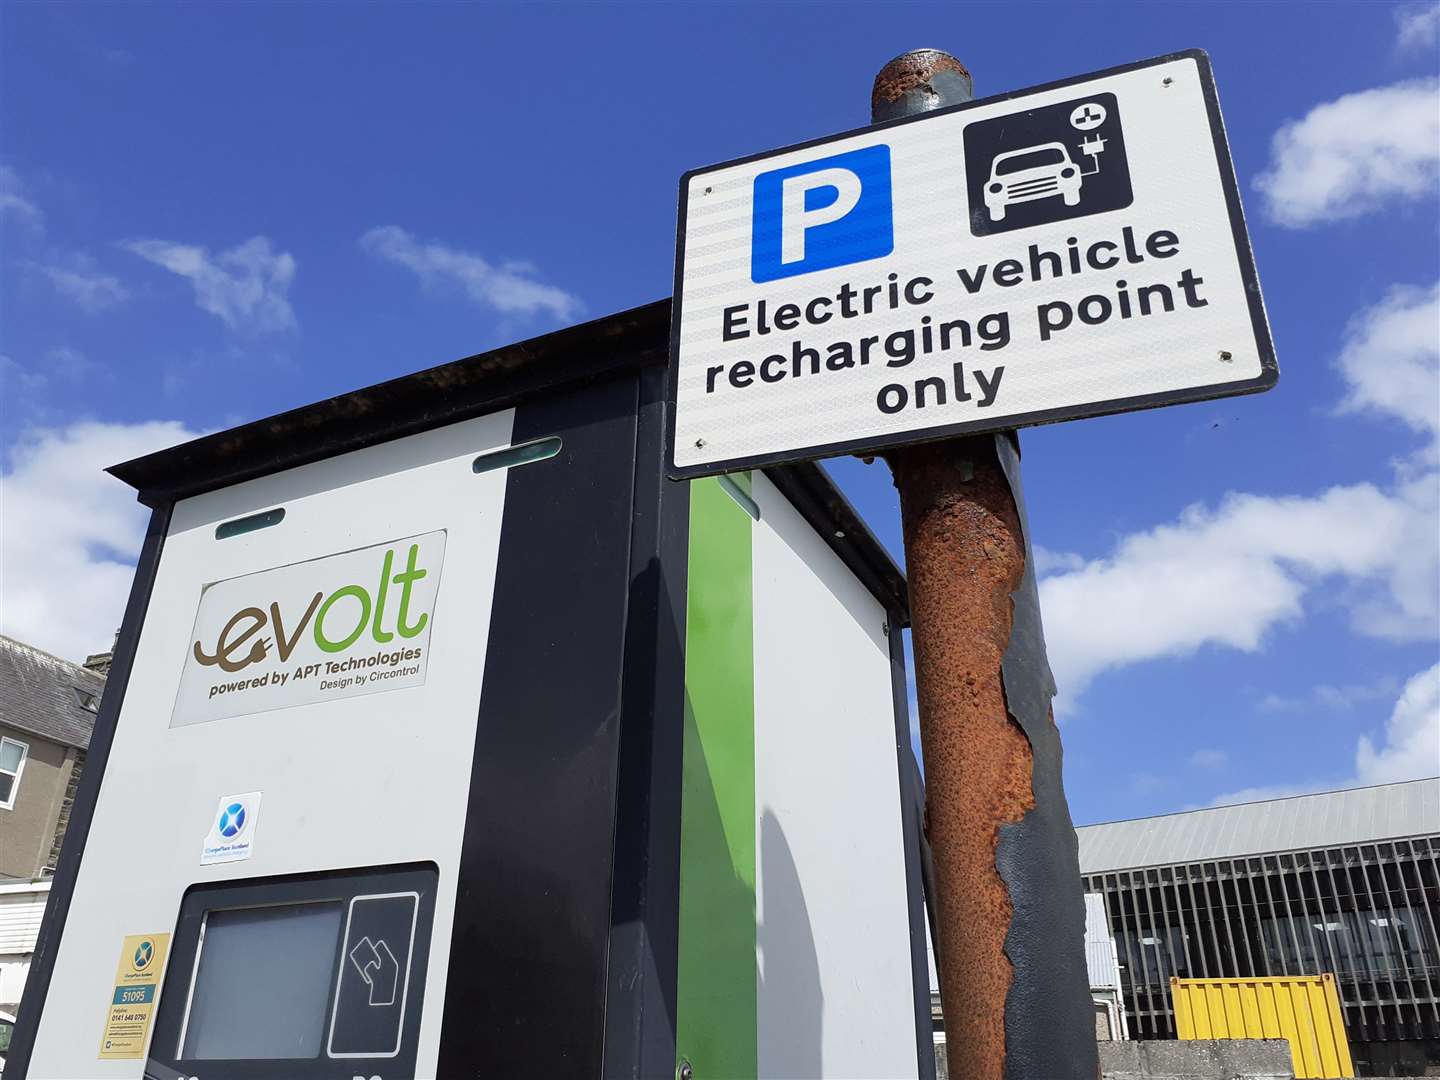 More charging points for electric vehicles are to be installed in the west Highlands.